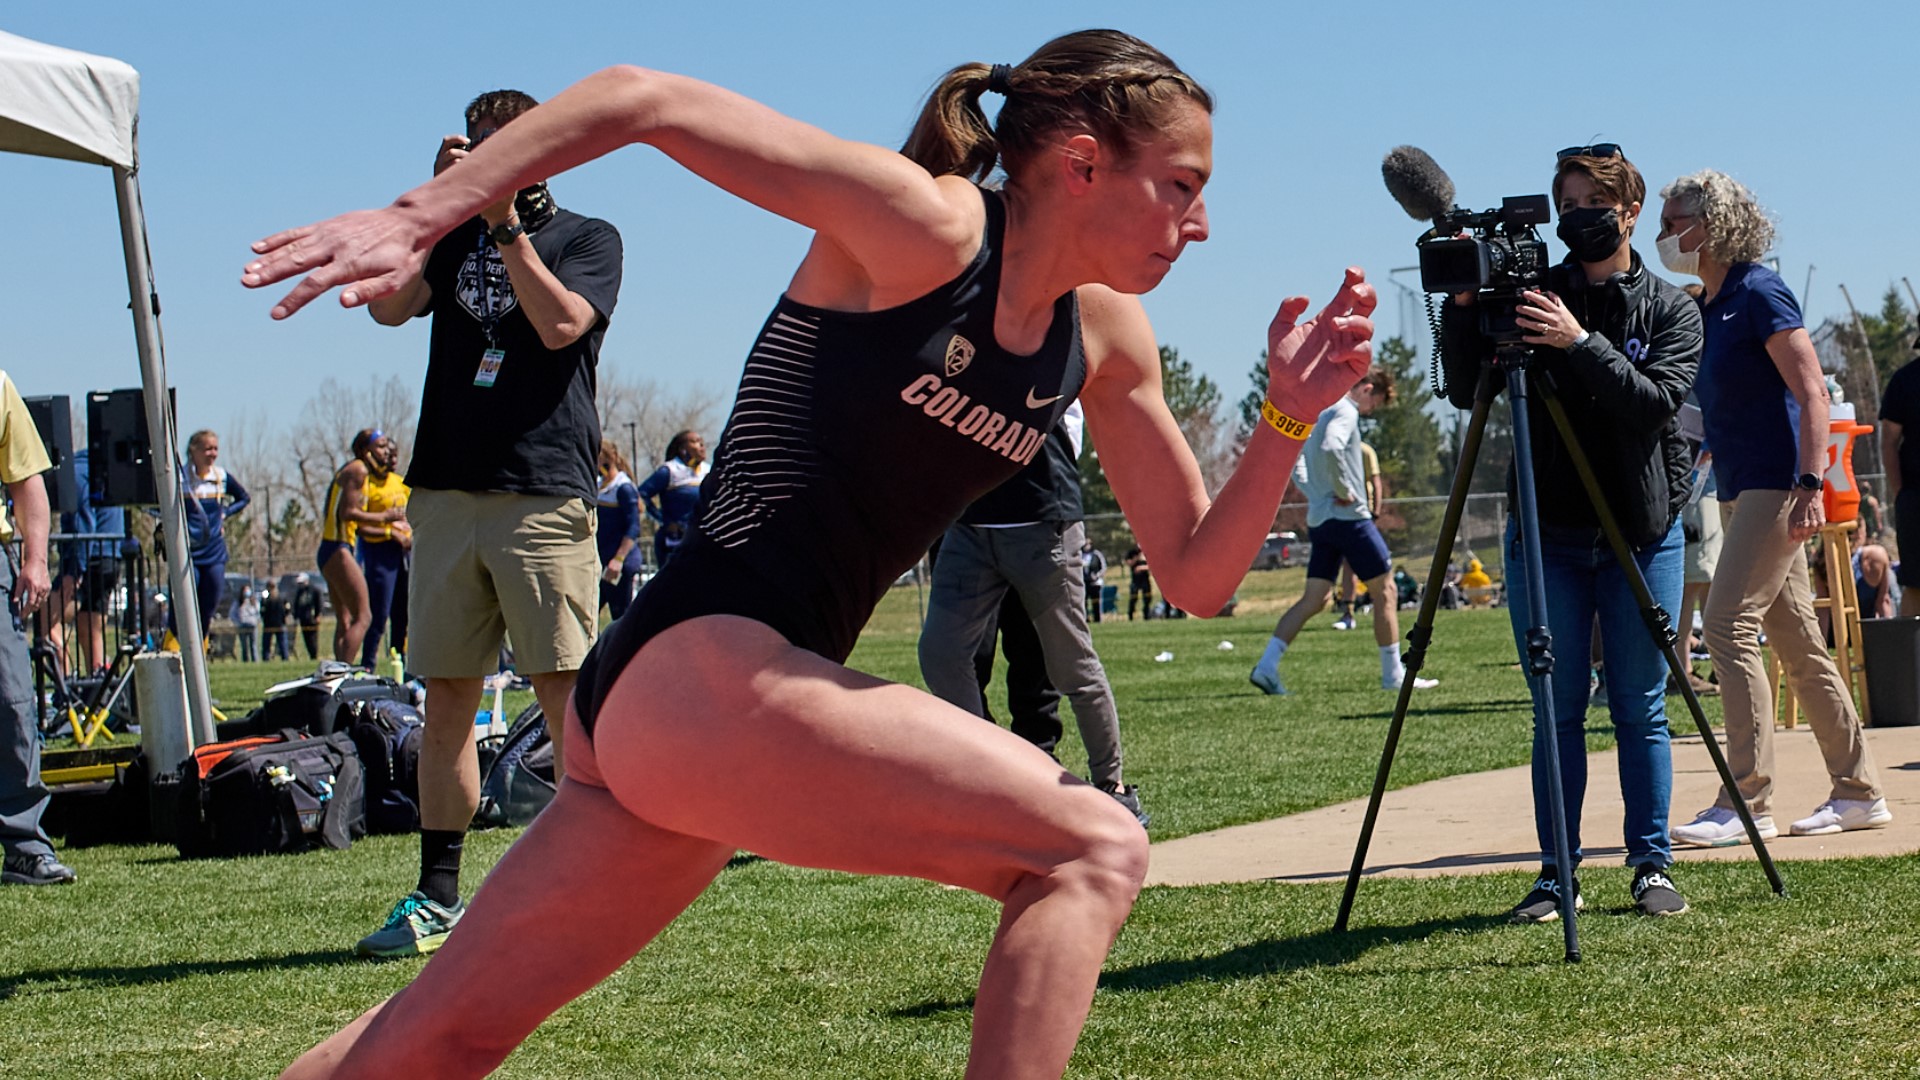 Sage Hurta won the Women’s Mile at the 2021 NCAA Indoor Track and Field Championships with a time of 4:30.58, becoming only the second CU Buff to win that title.